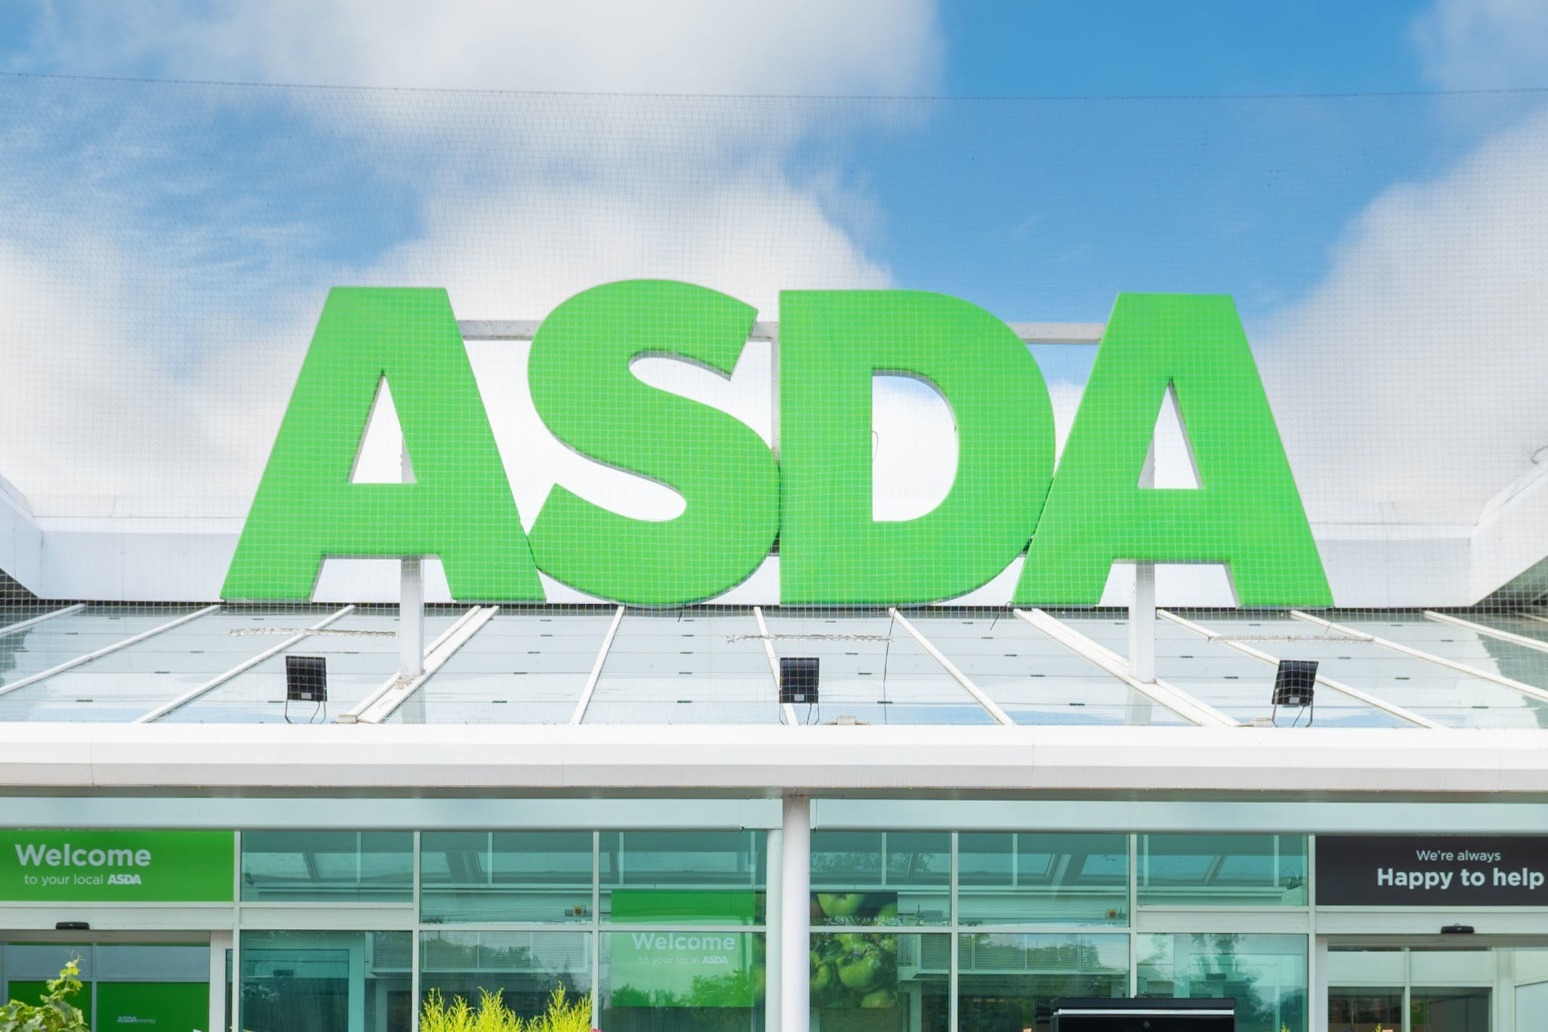 Co-op offloads petrol forecourt business to Asda in £600m deal 